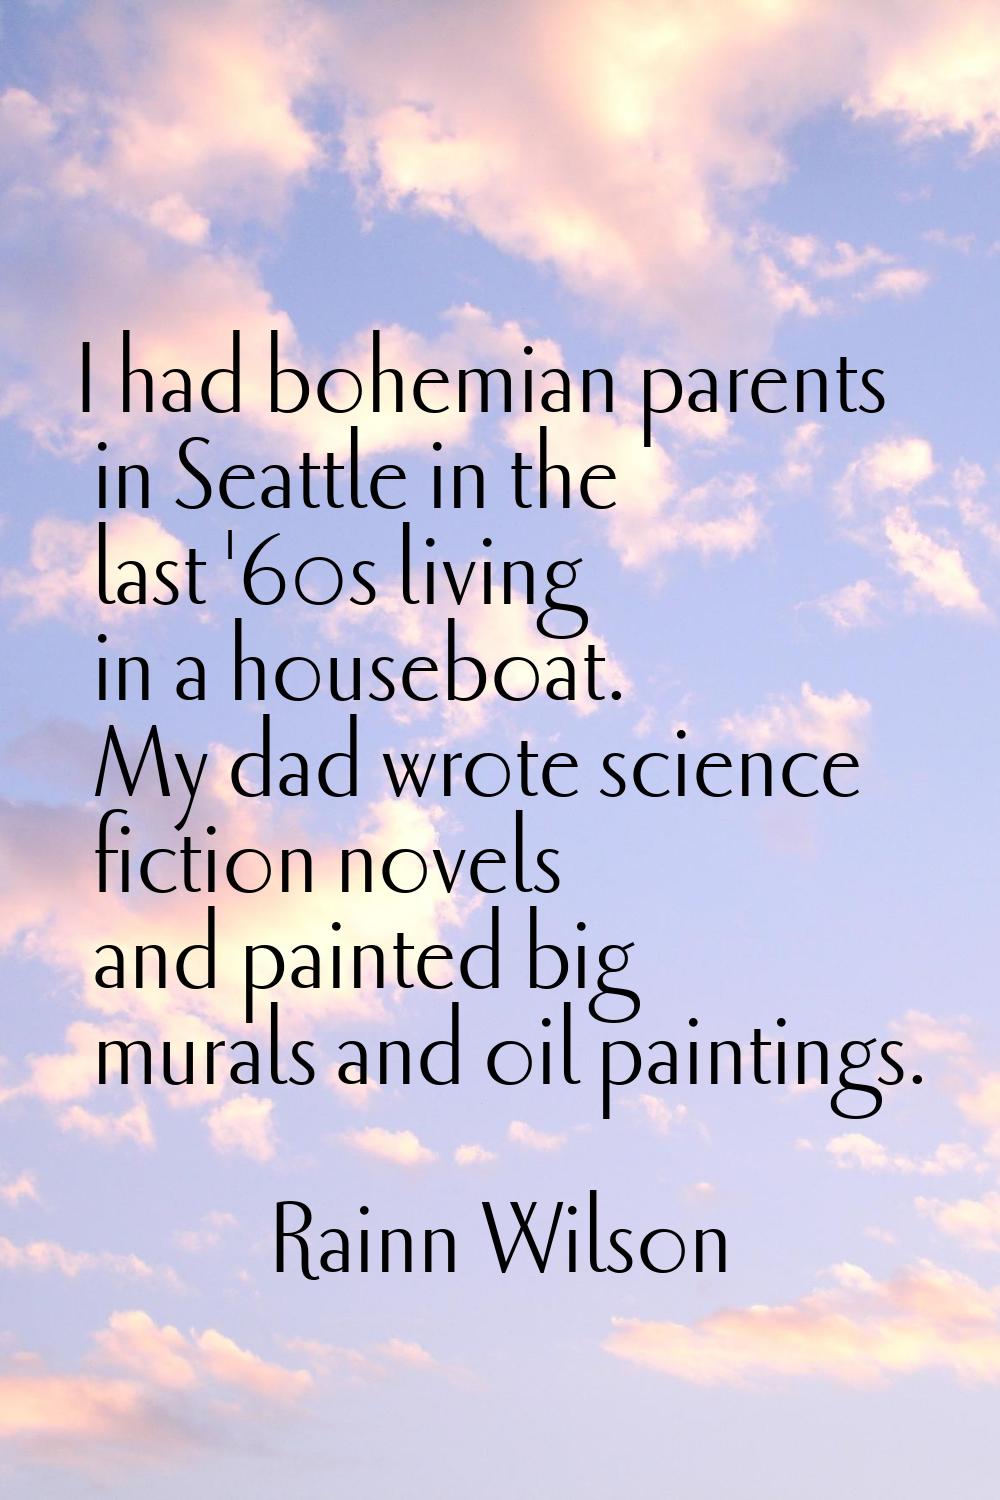 I had bohemian parents in Seattle in the last '60s living in a houseboat. My dad wrote science fict